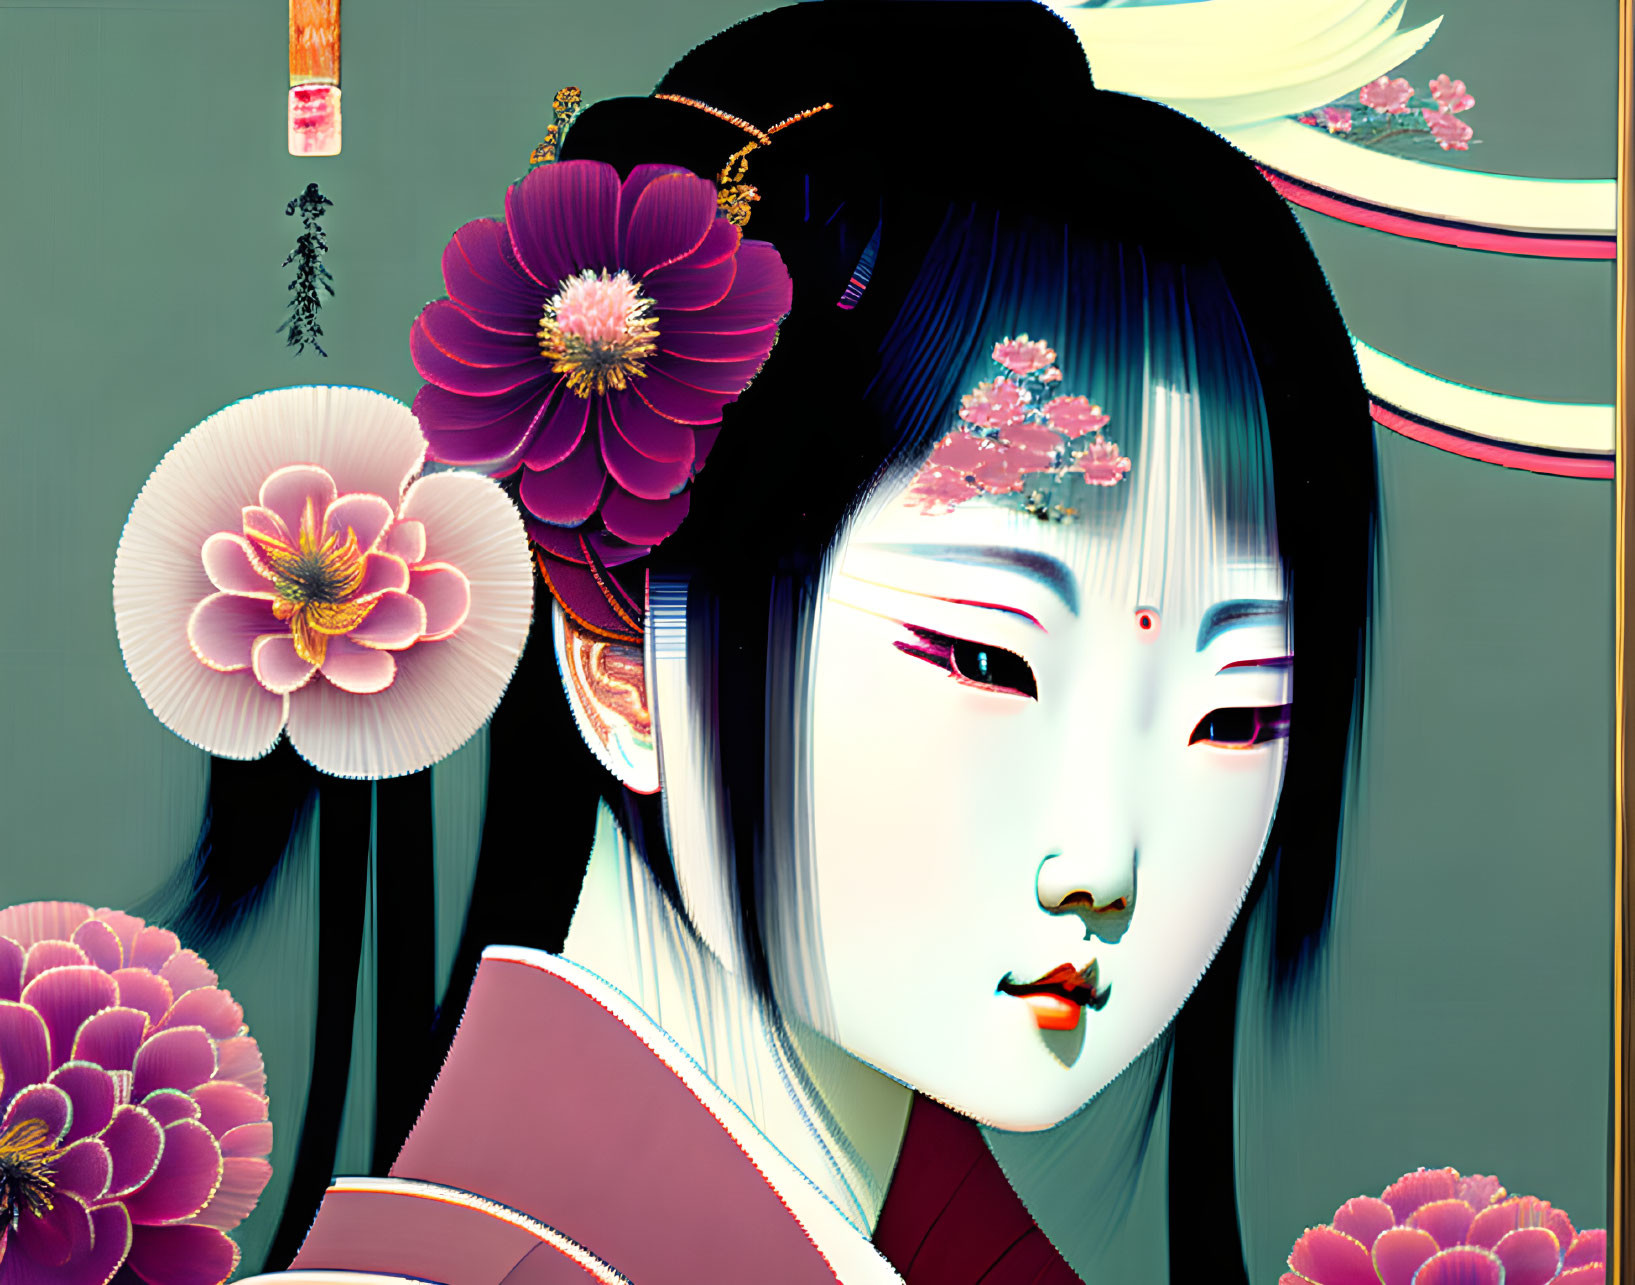 Digital illustration of woman with Japanese geisha appearance and floral elements.